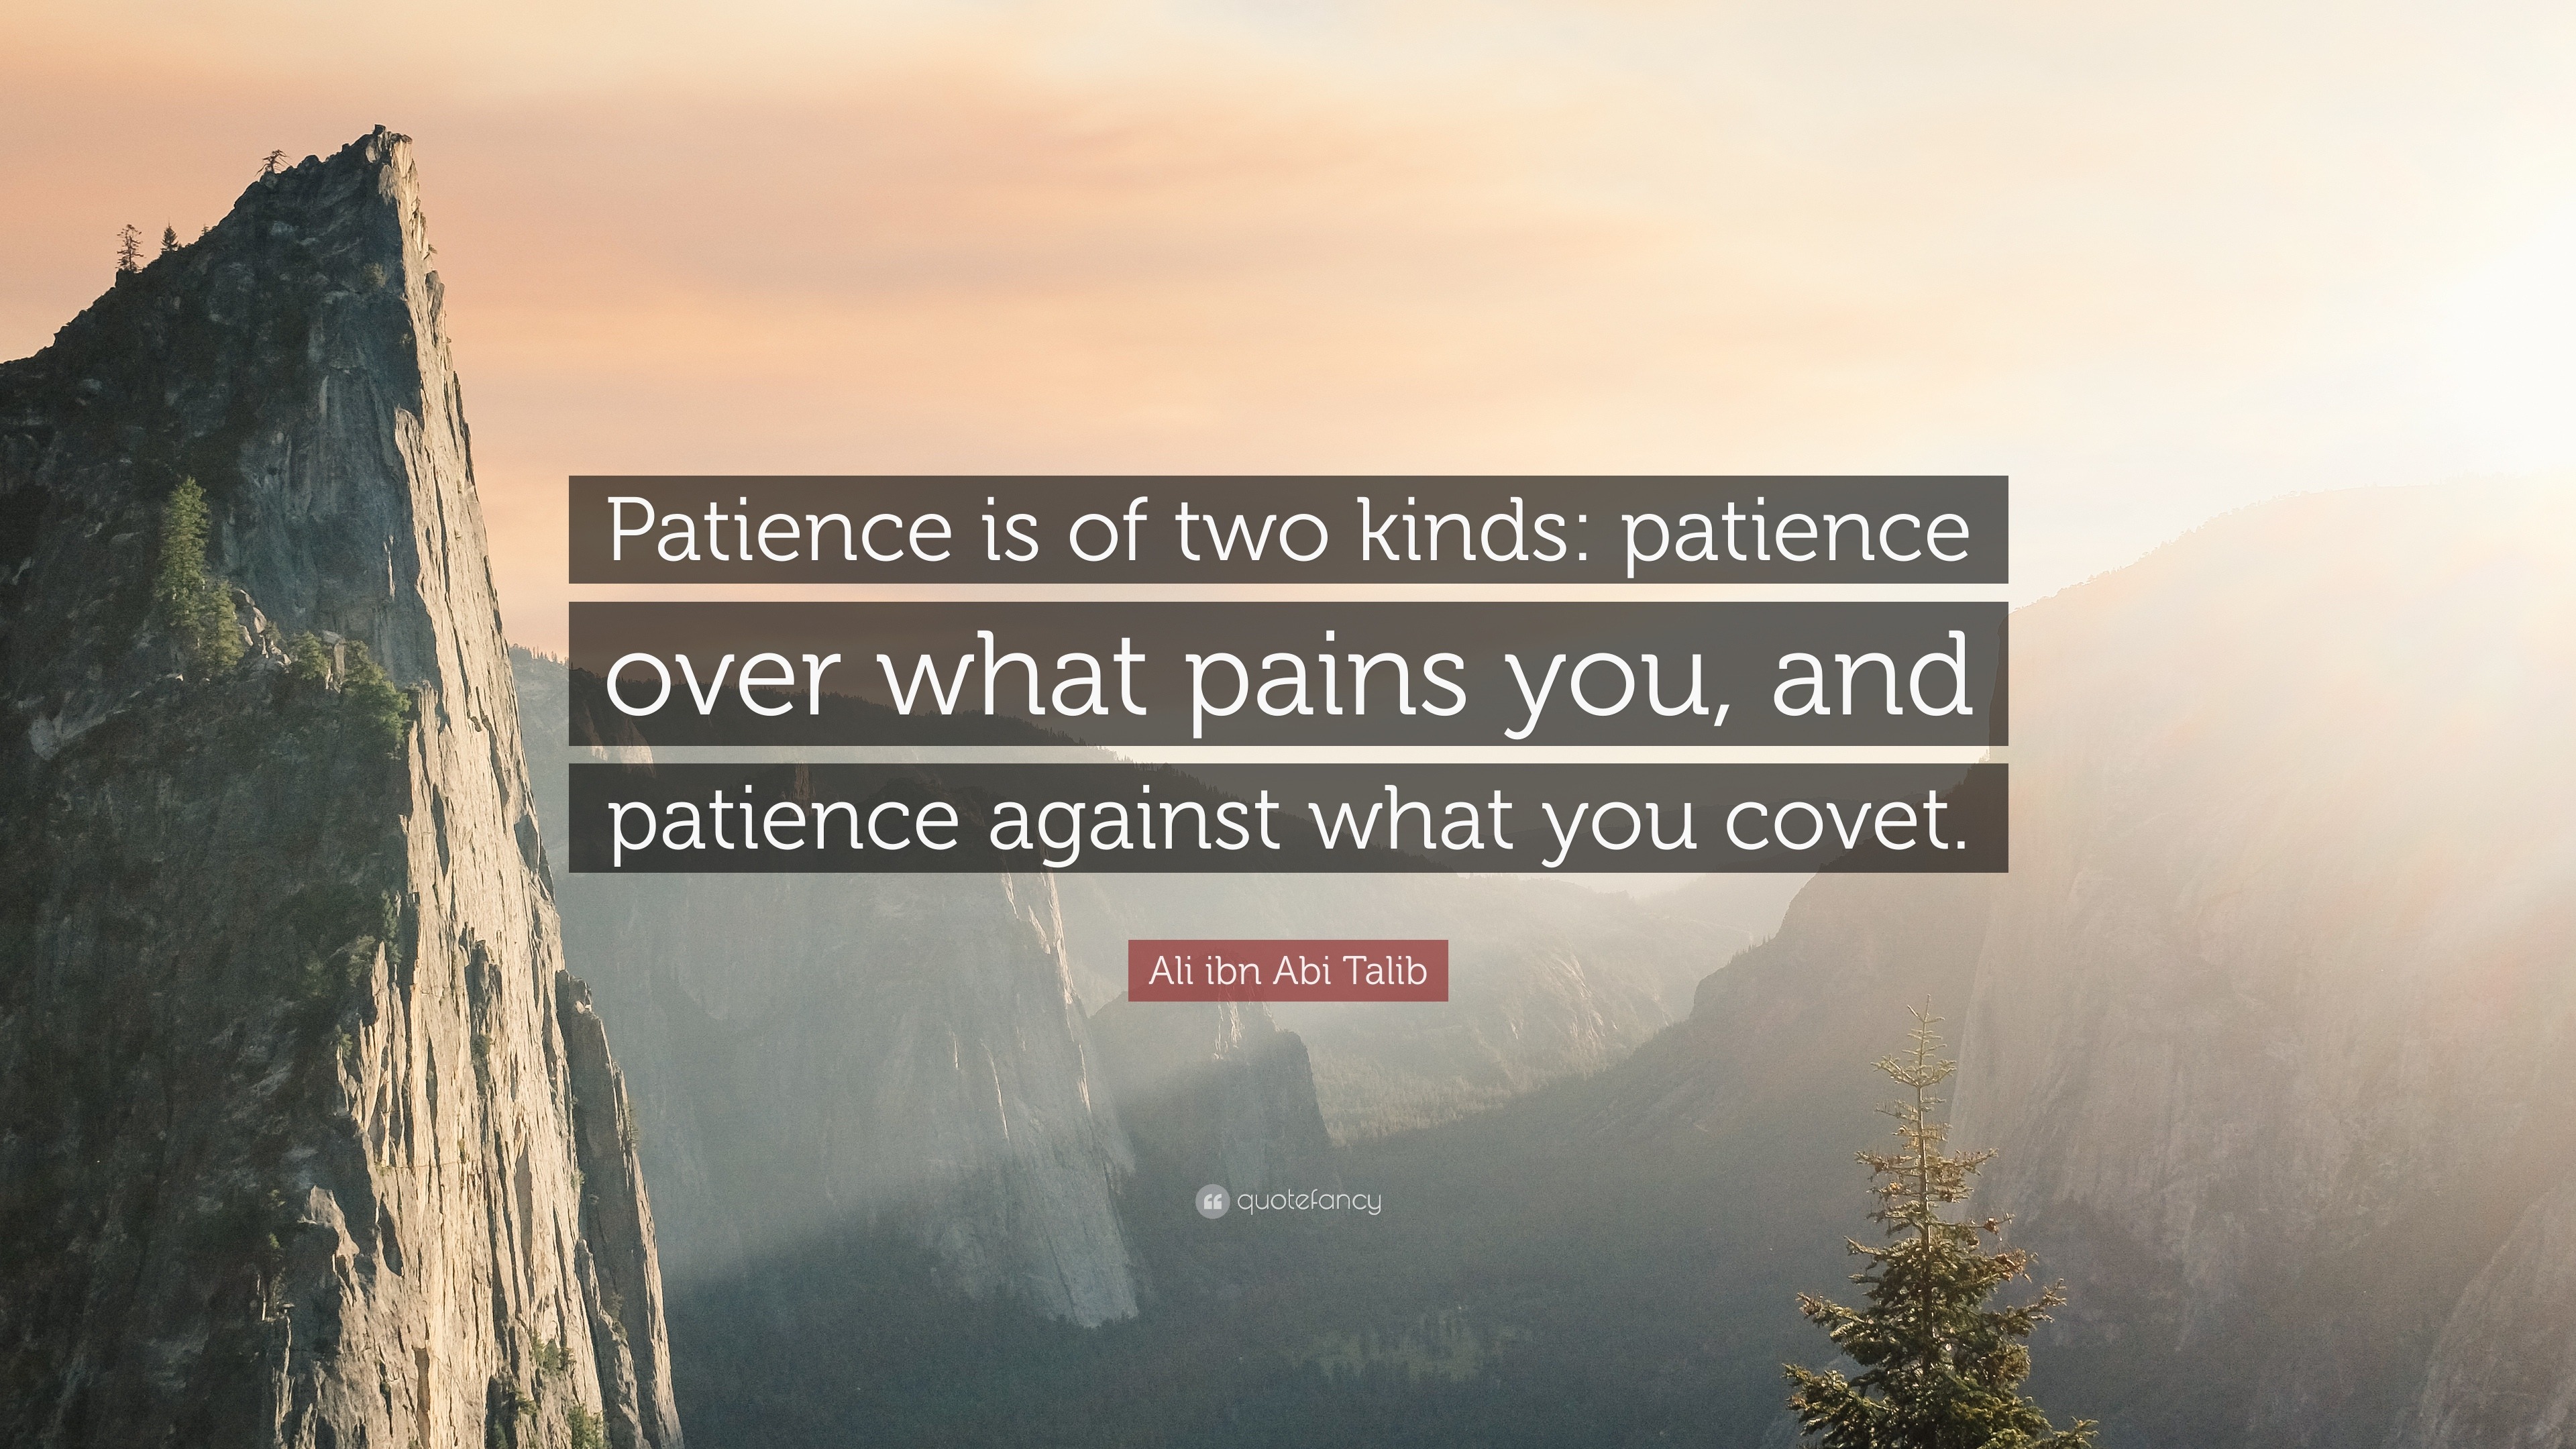 Ali ibn Abi Talib Quote: “Patience is of two kinds: patience over what ...